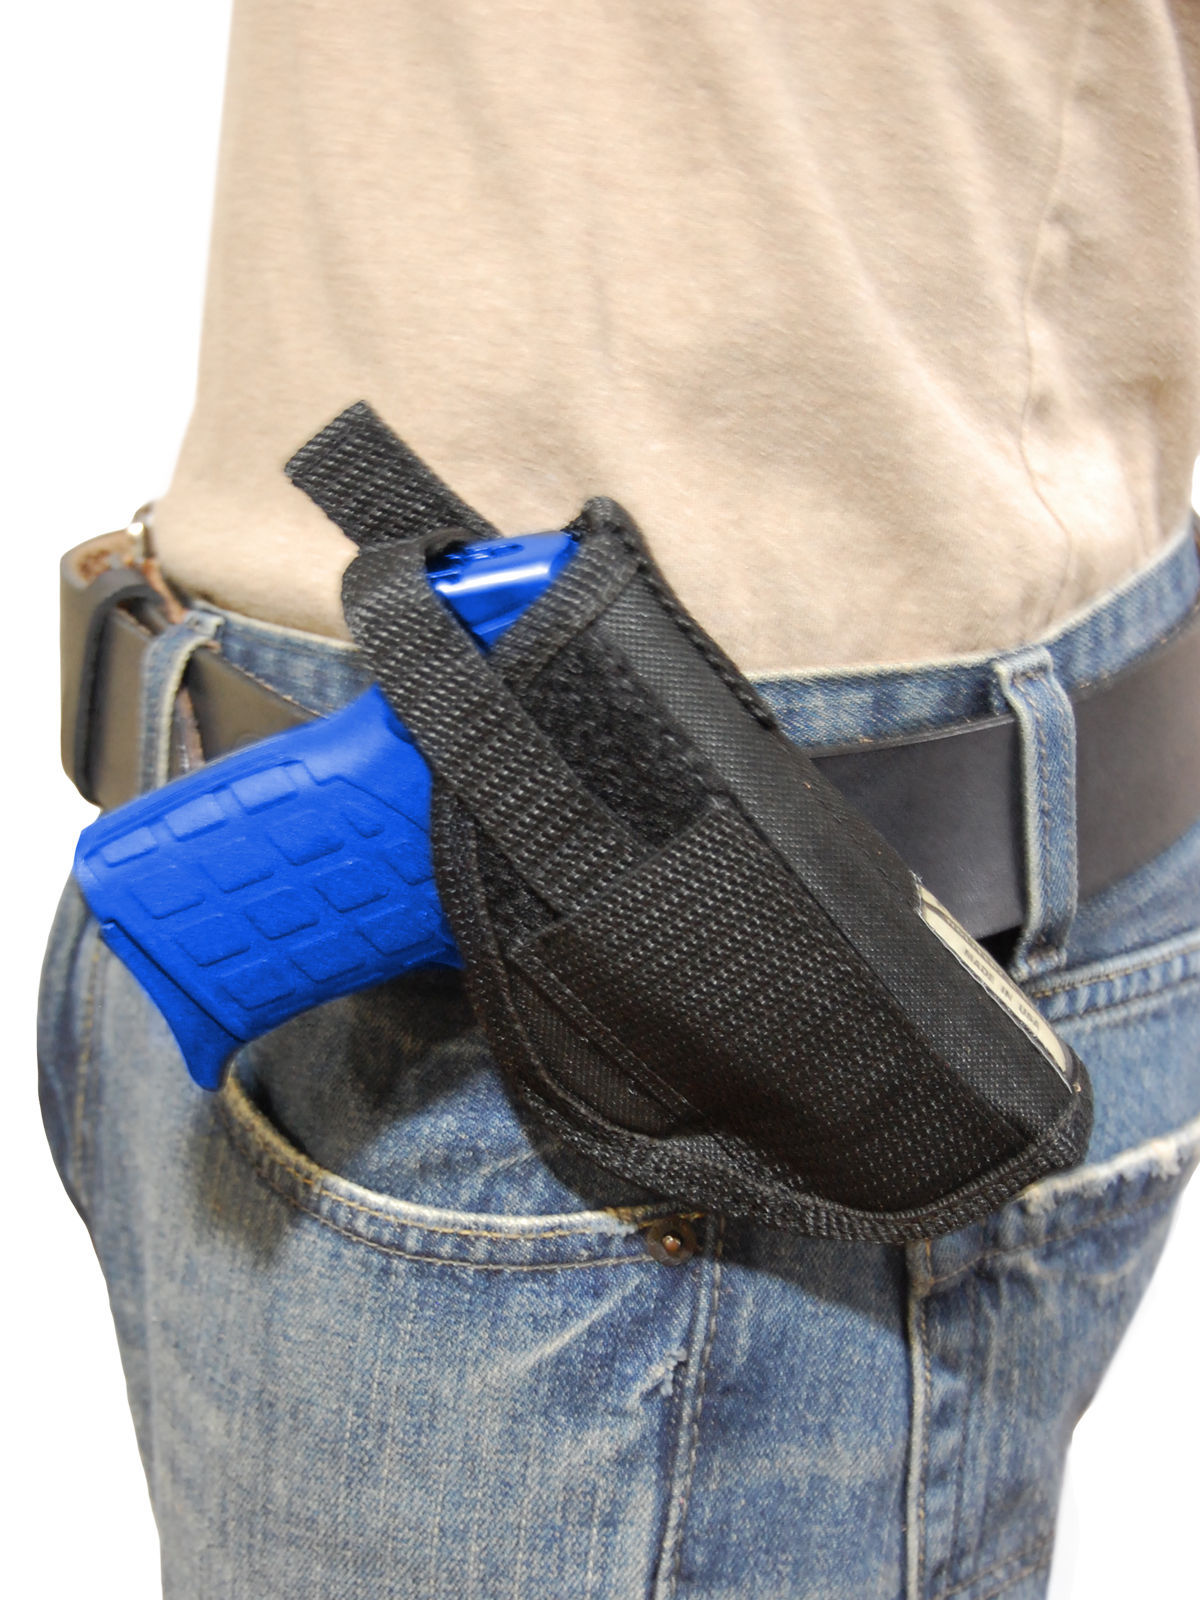 compact 9mm holster